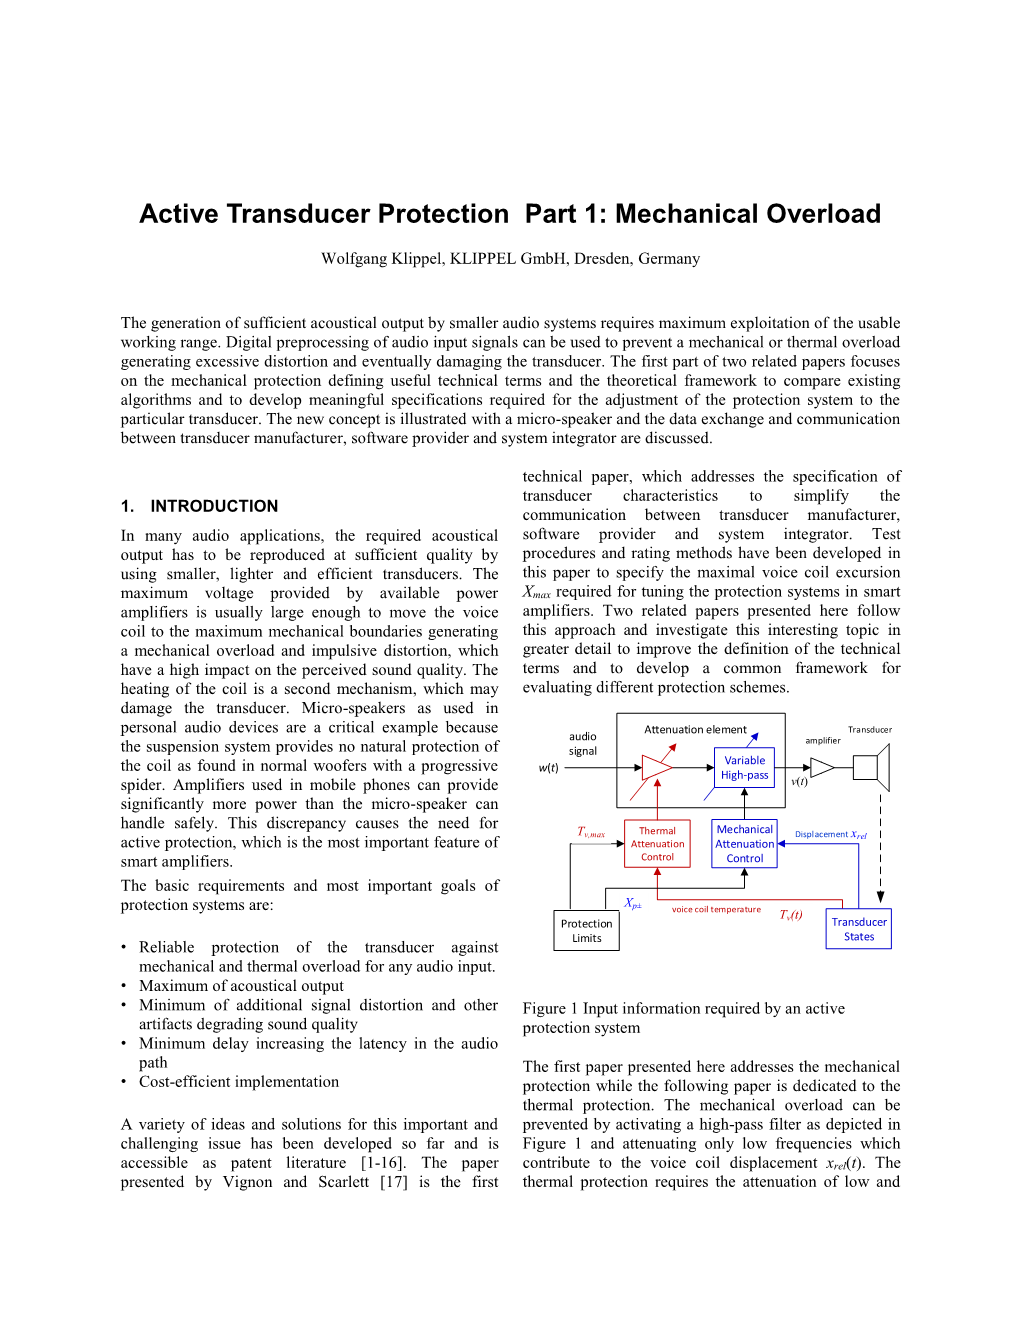 Active Transducer Protection Part 1: Mechanical Overload